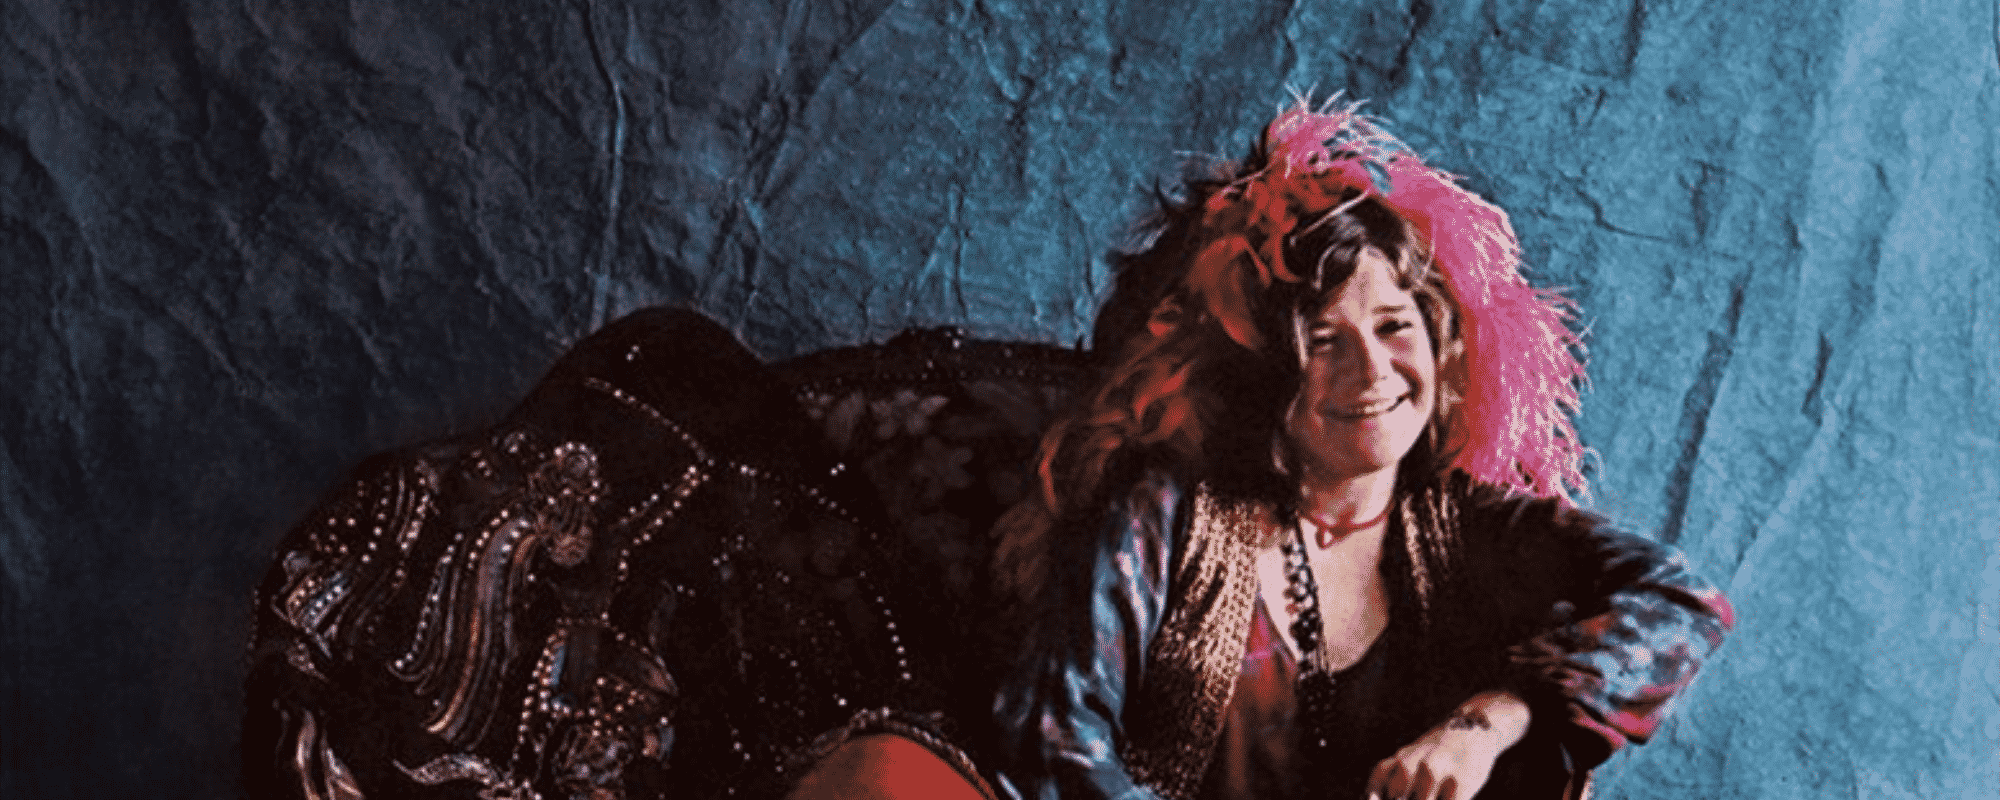 New Video Celebrates 50 Years of Janis Joplin’s “Me and Bobby McGee”